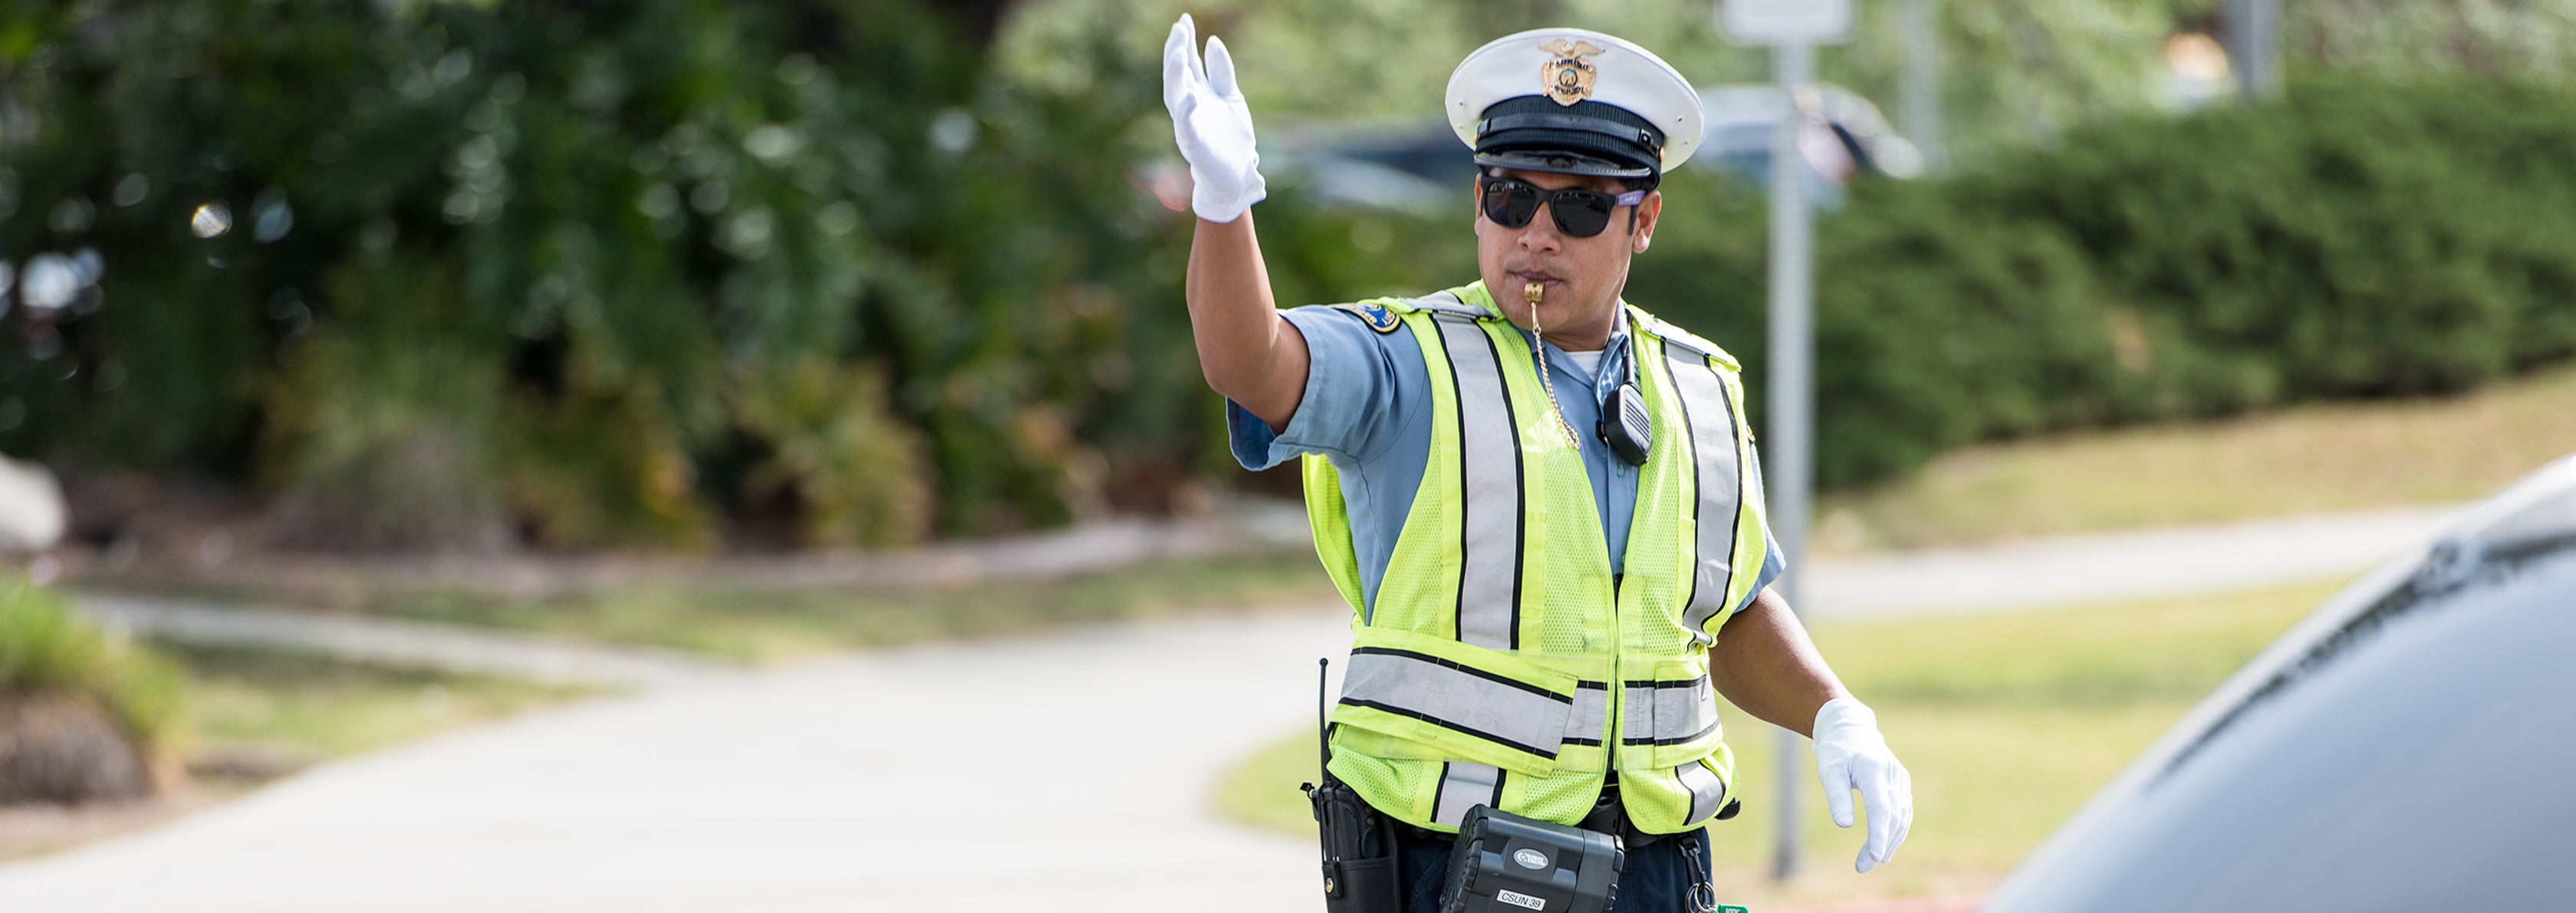 Parking officer directing traffic